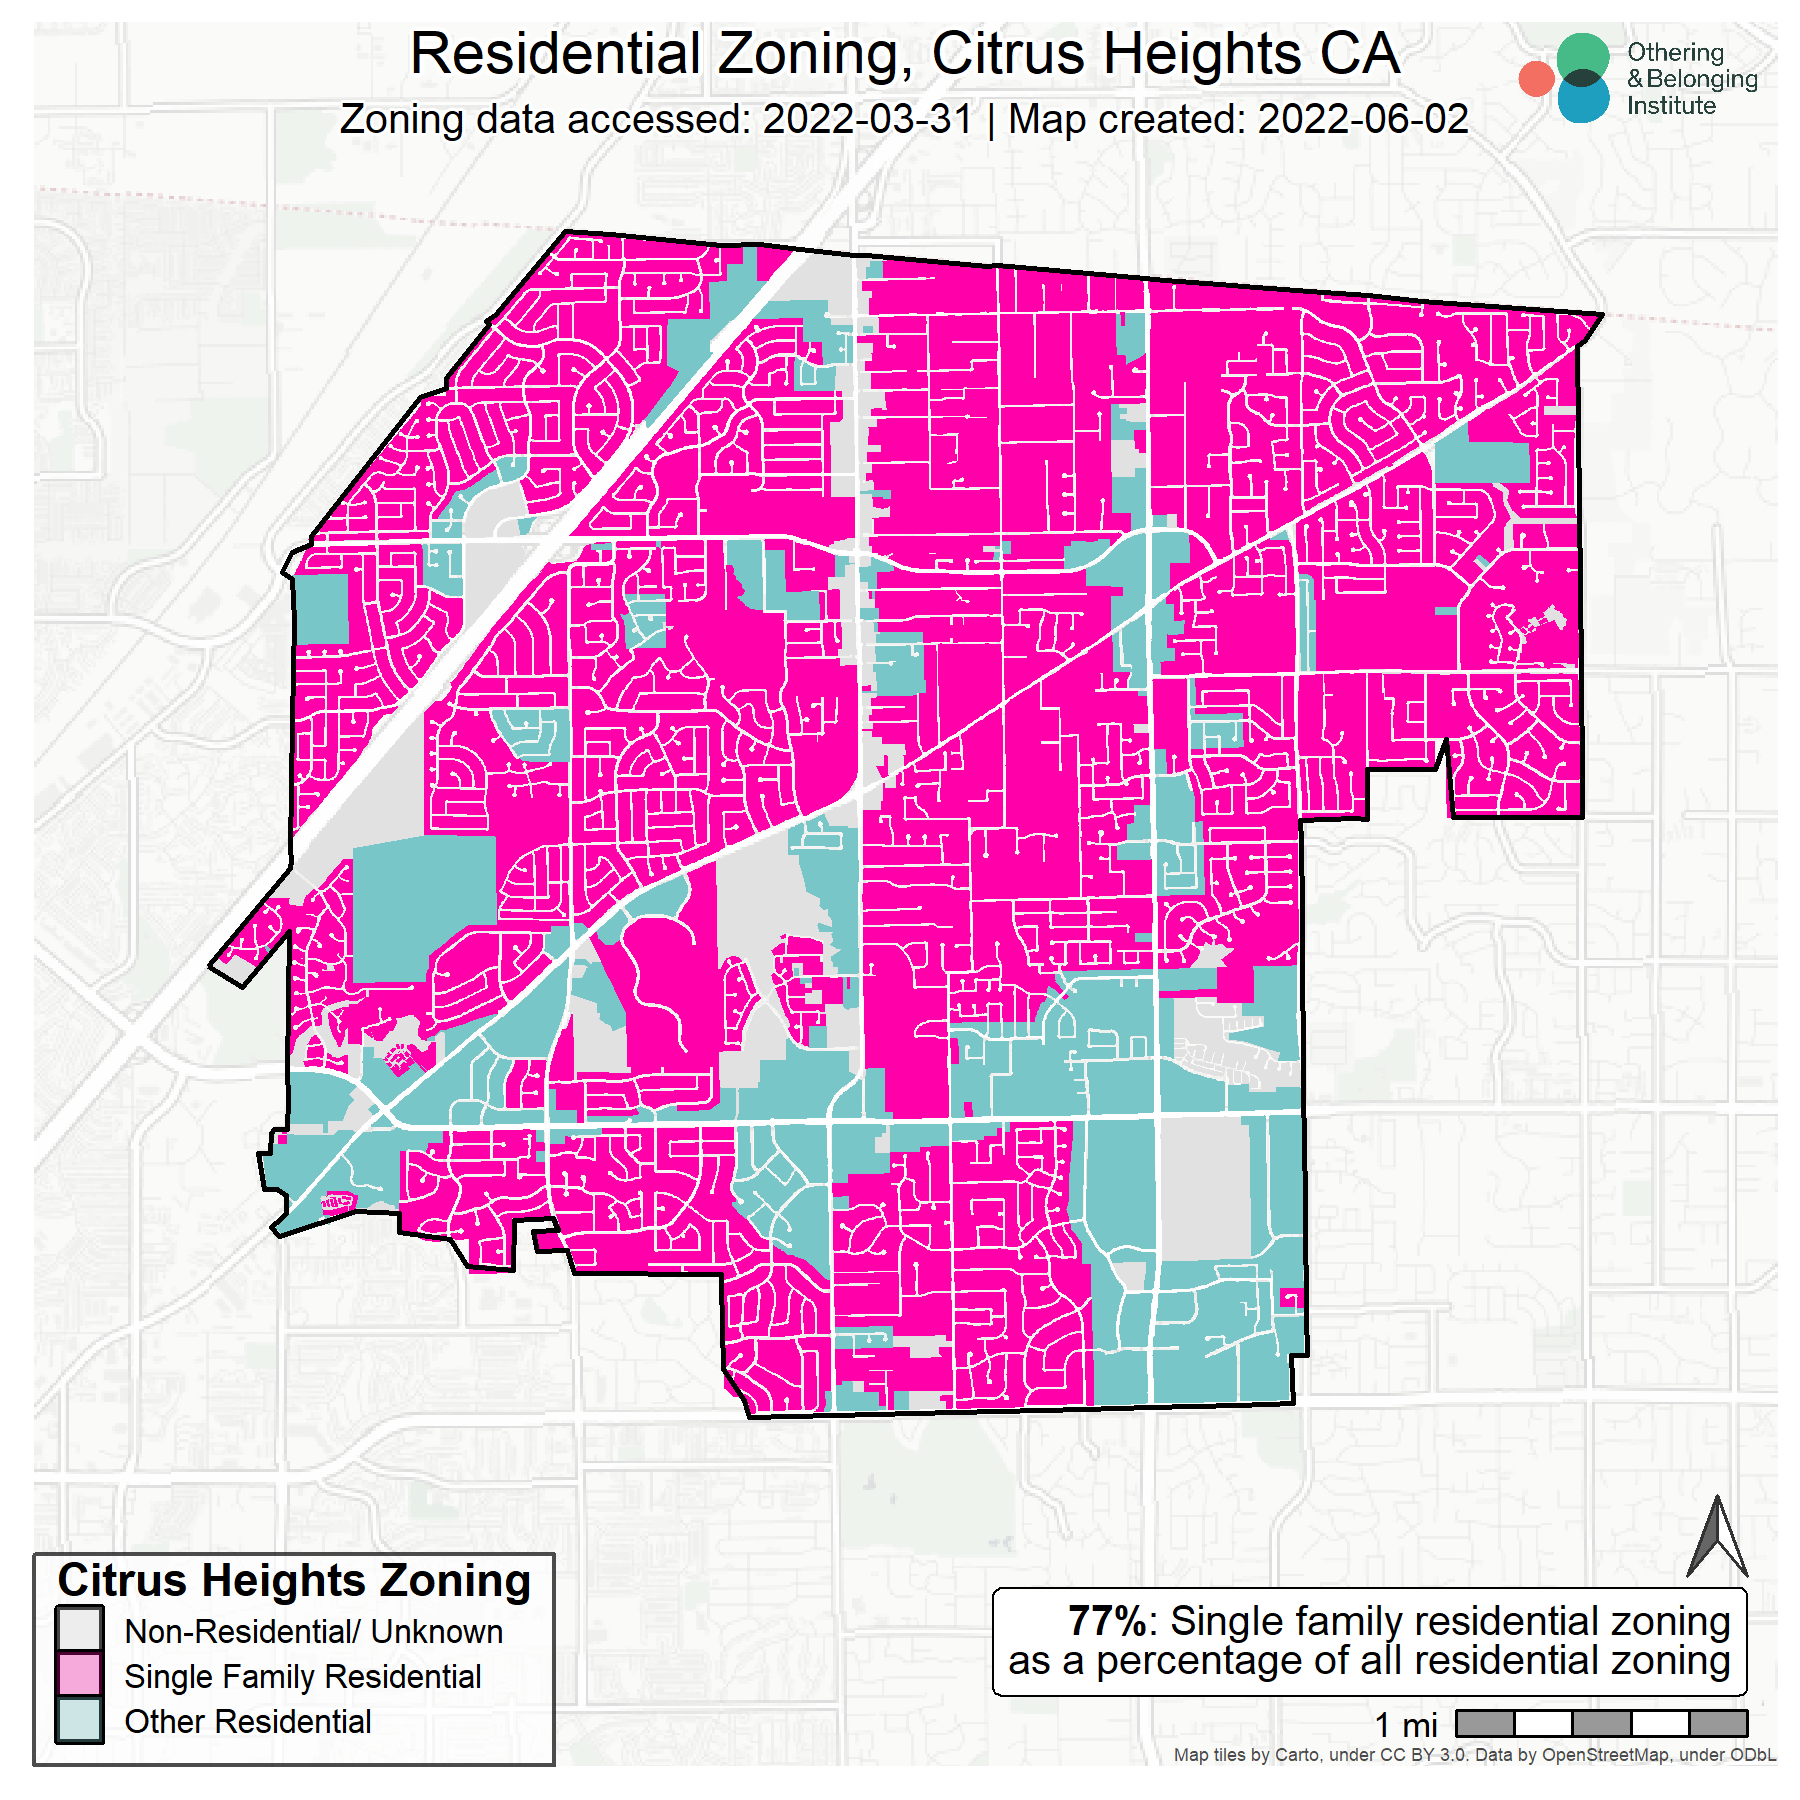 Zoning map of Citrus Heights